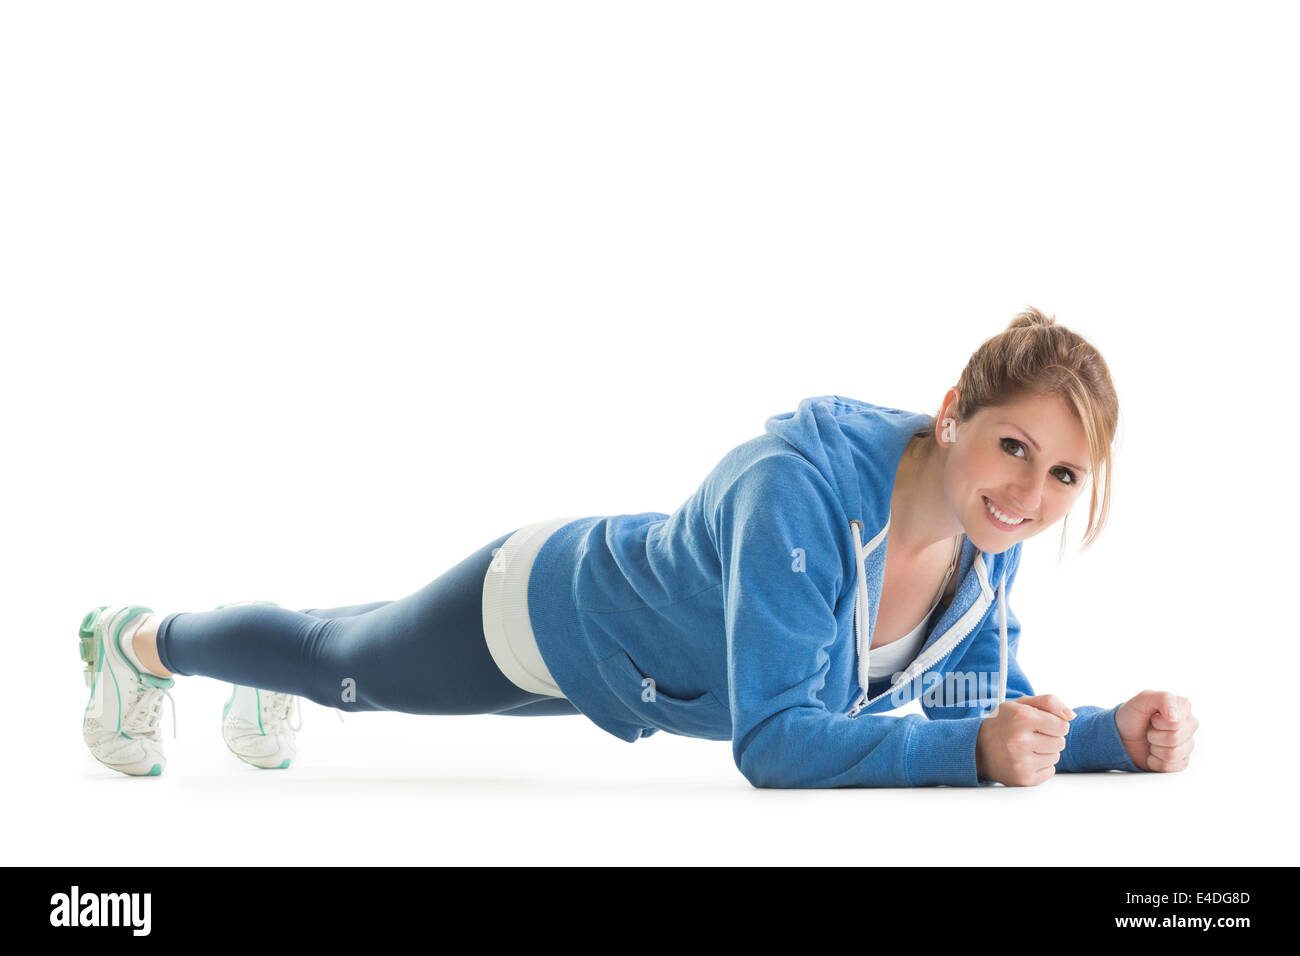 Smiling young woman in basic plank posture Stock Photo